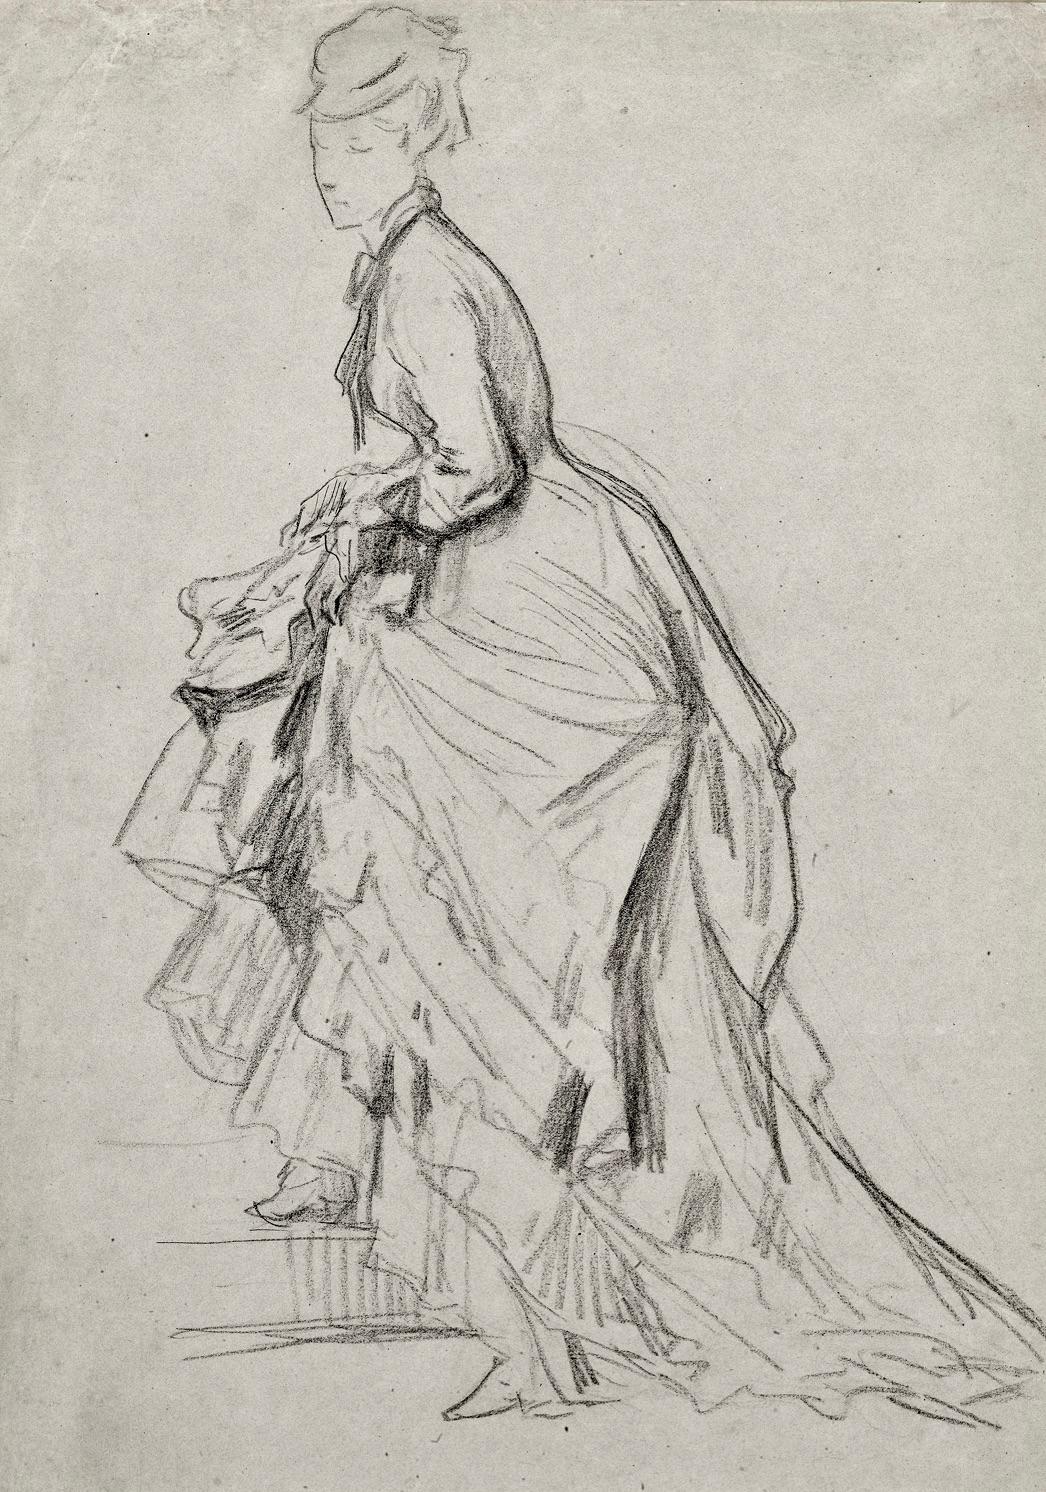 Unknown Figurative Art - Showing an Ankle - 19th Century French drawing of a Fashionable Lady